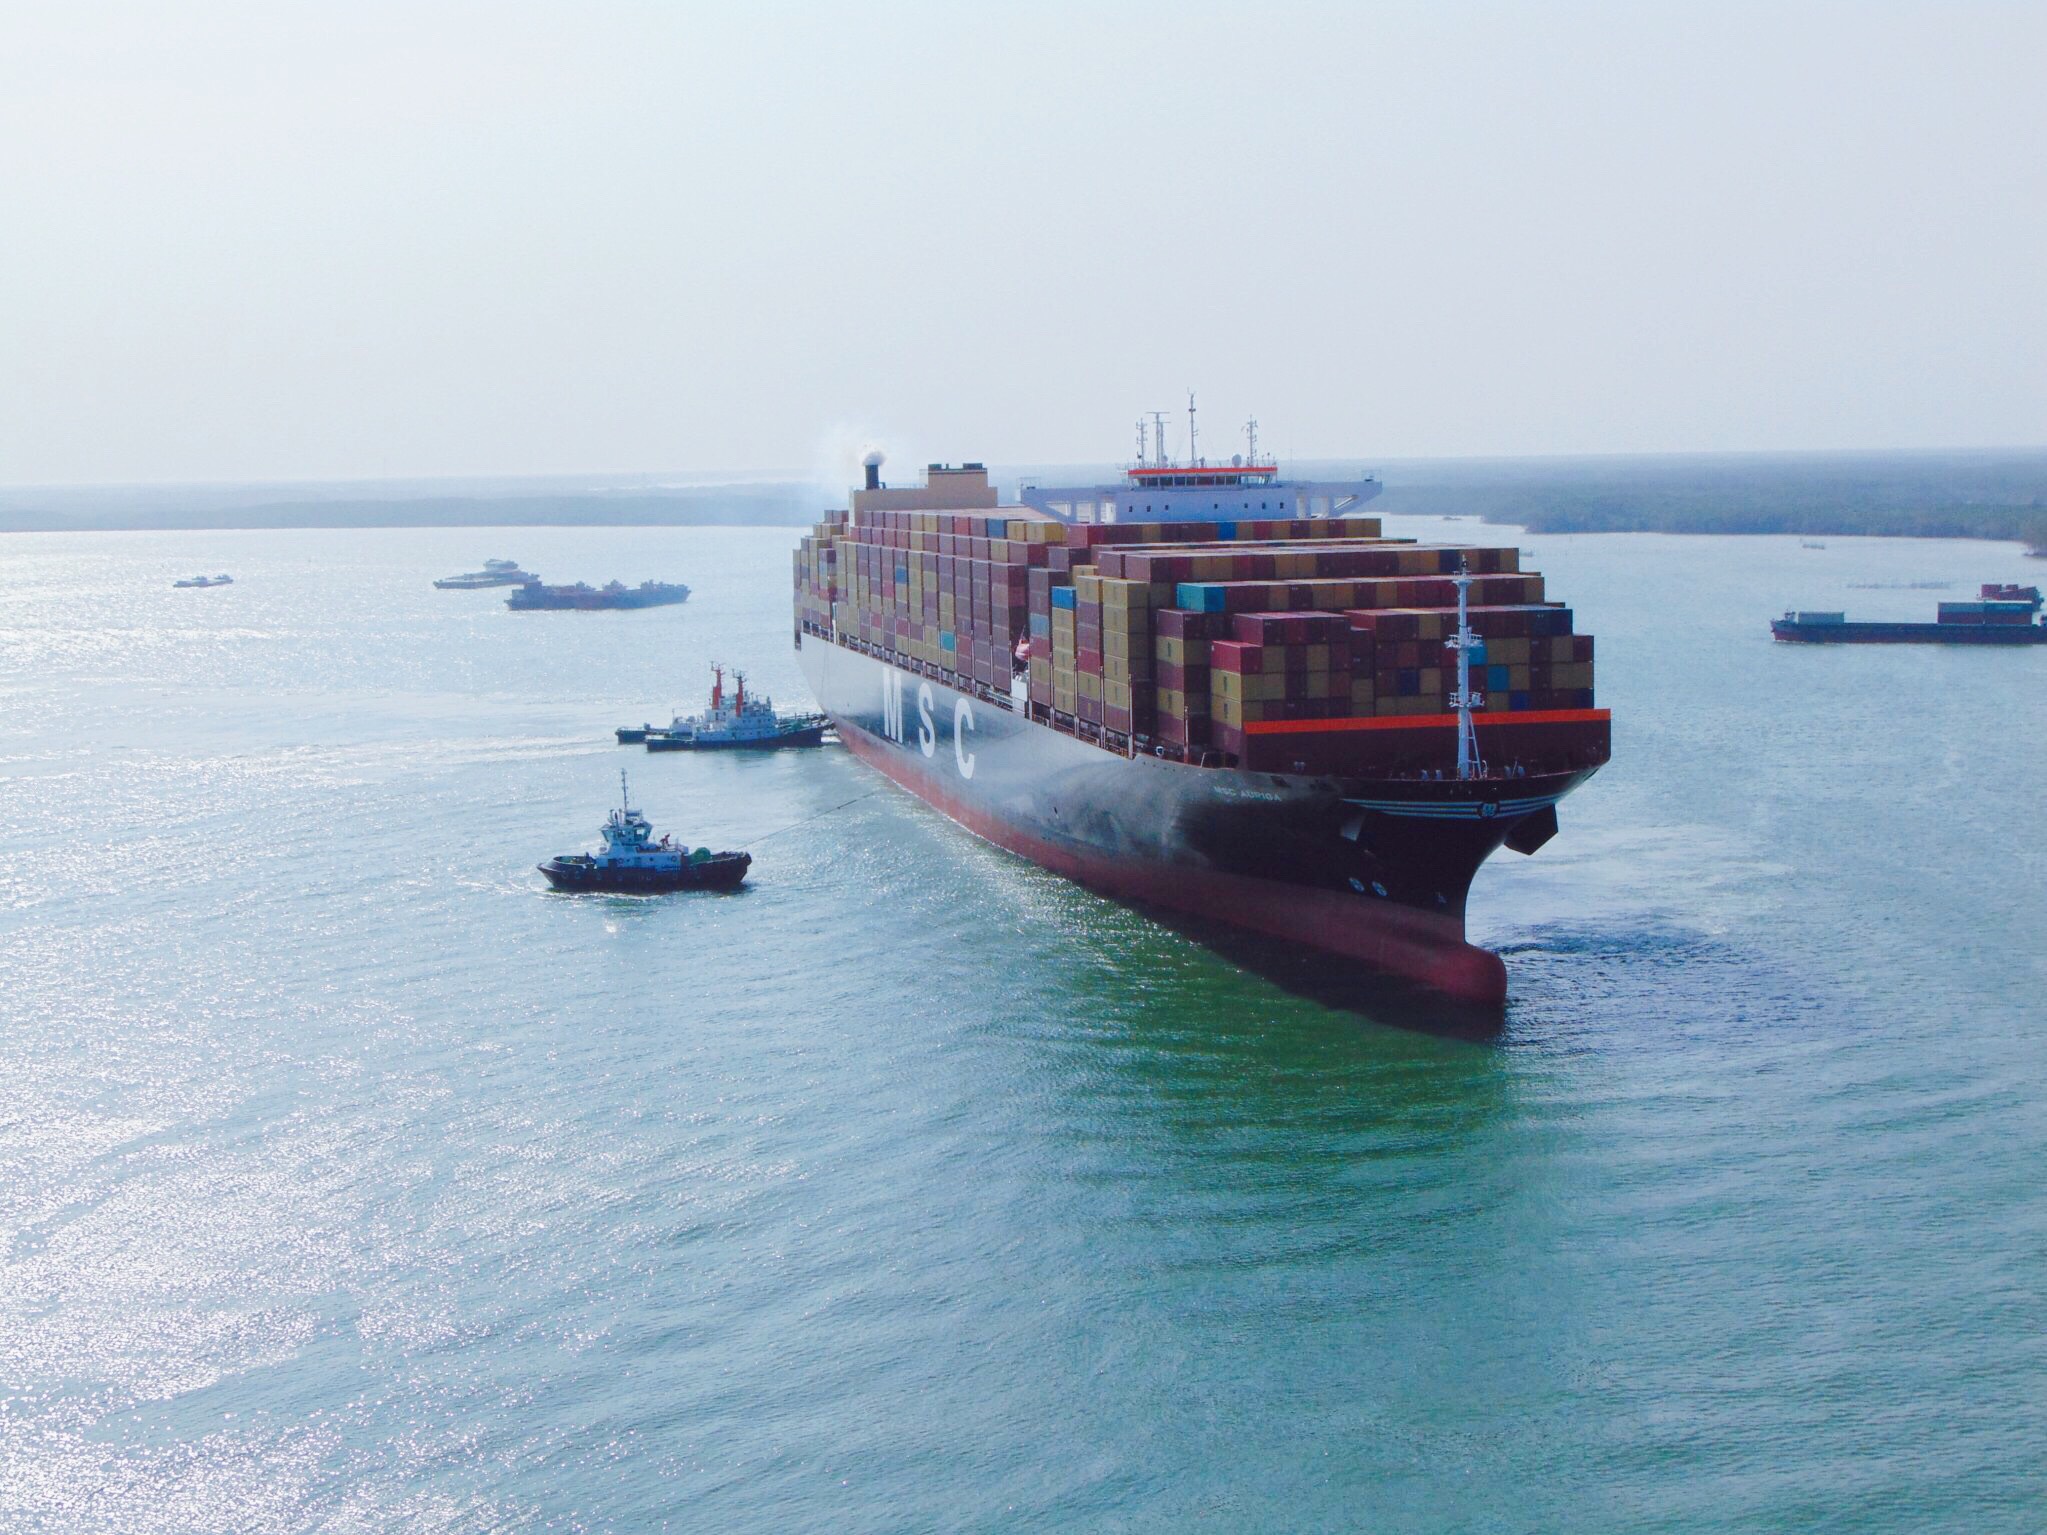 With over 15,000 TEUs, SP-SSA International Terminal (SSIT) handles the largest container volume to ever call a Vietnamese port